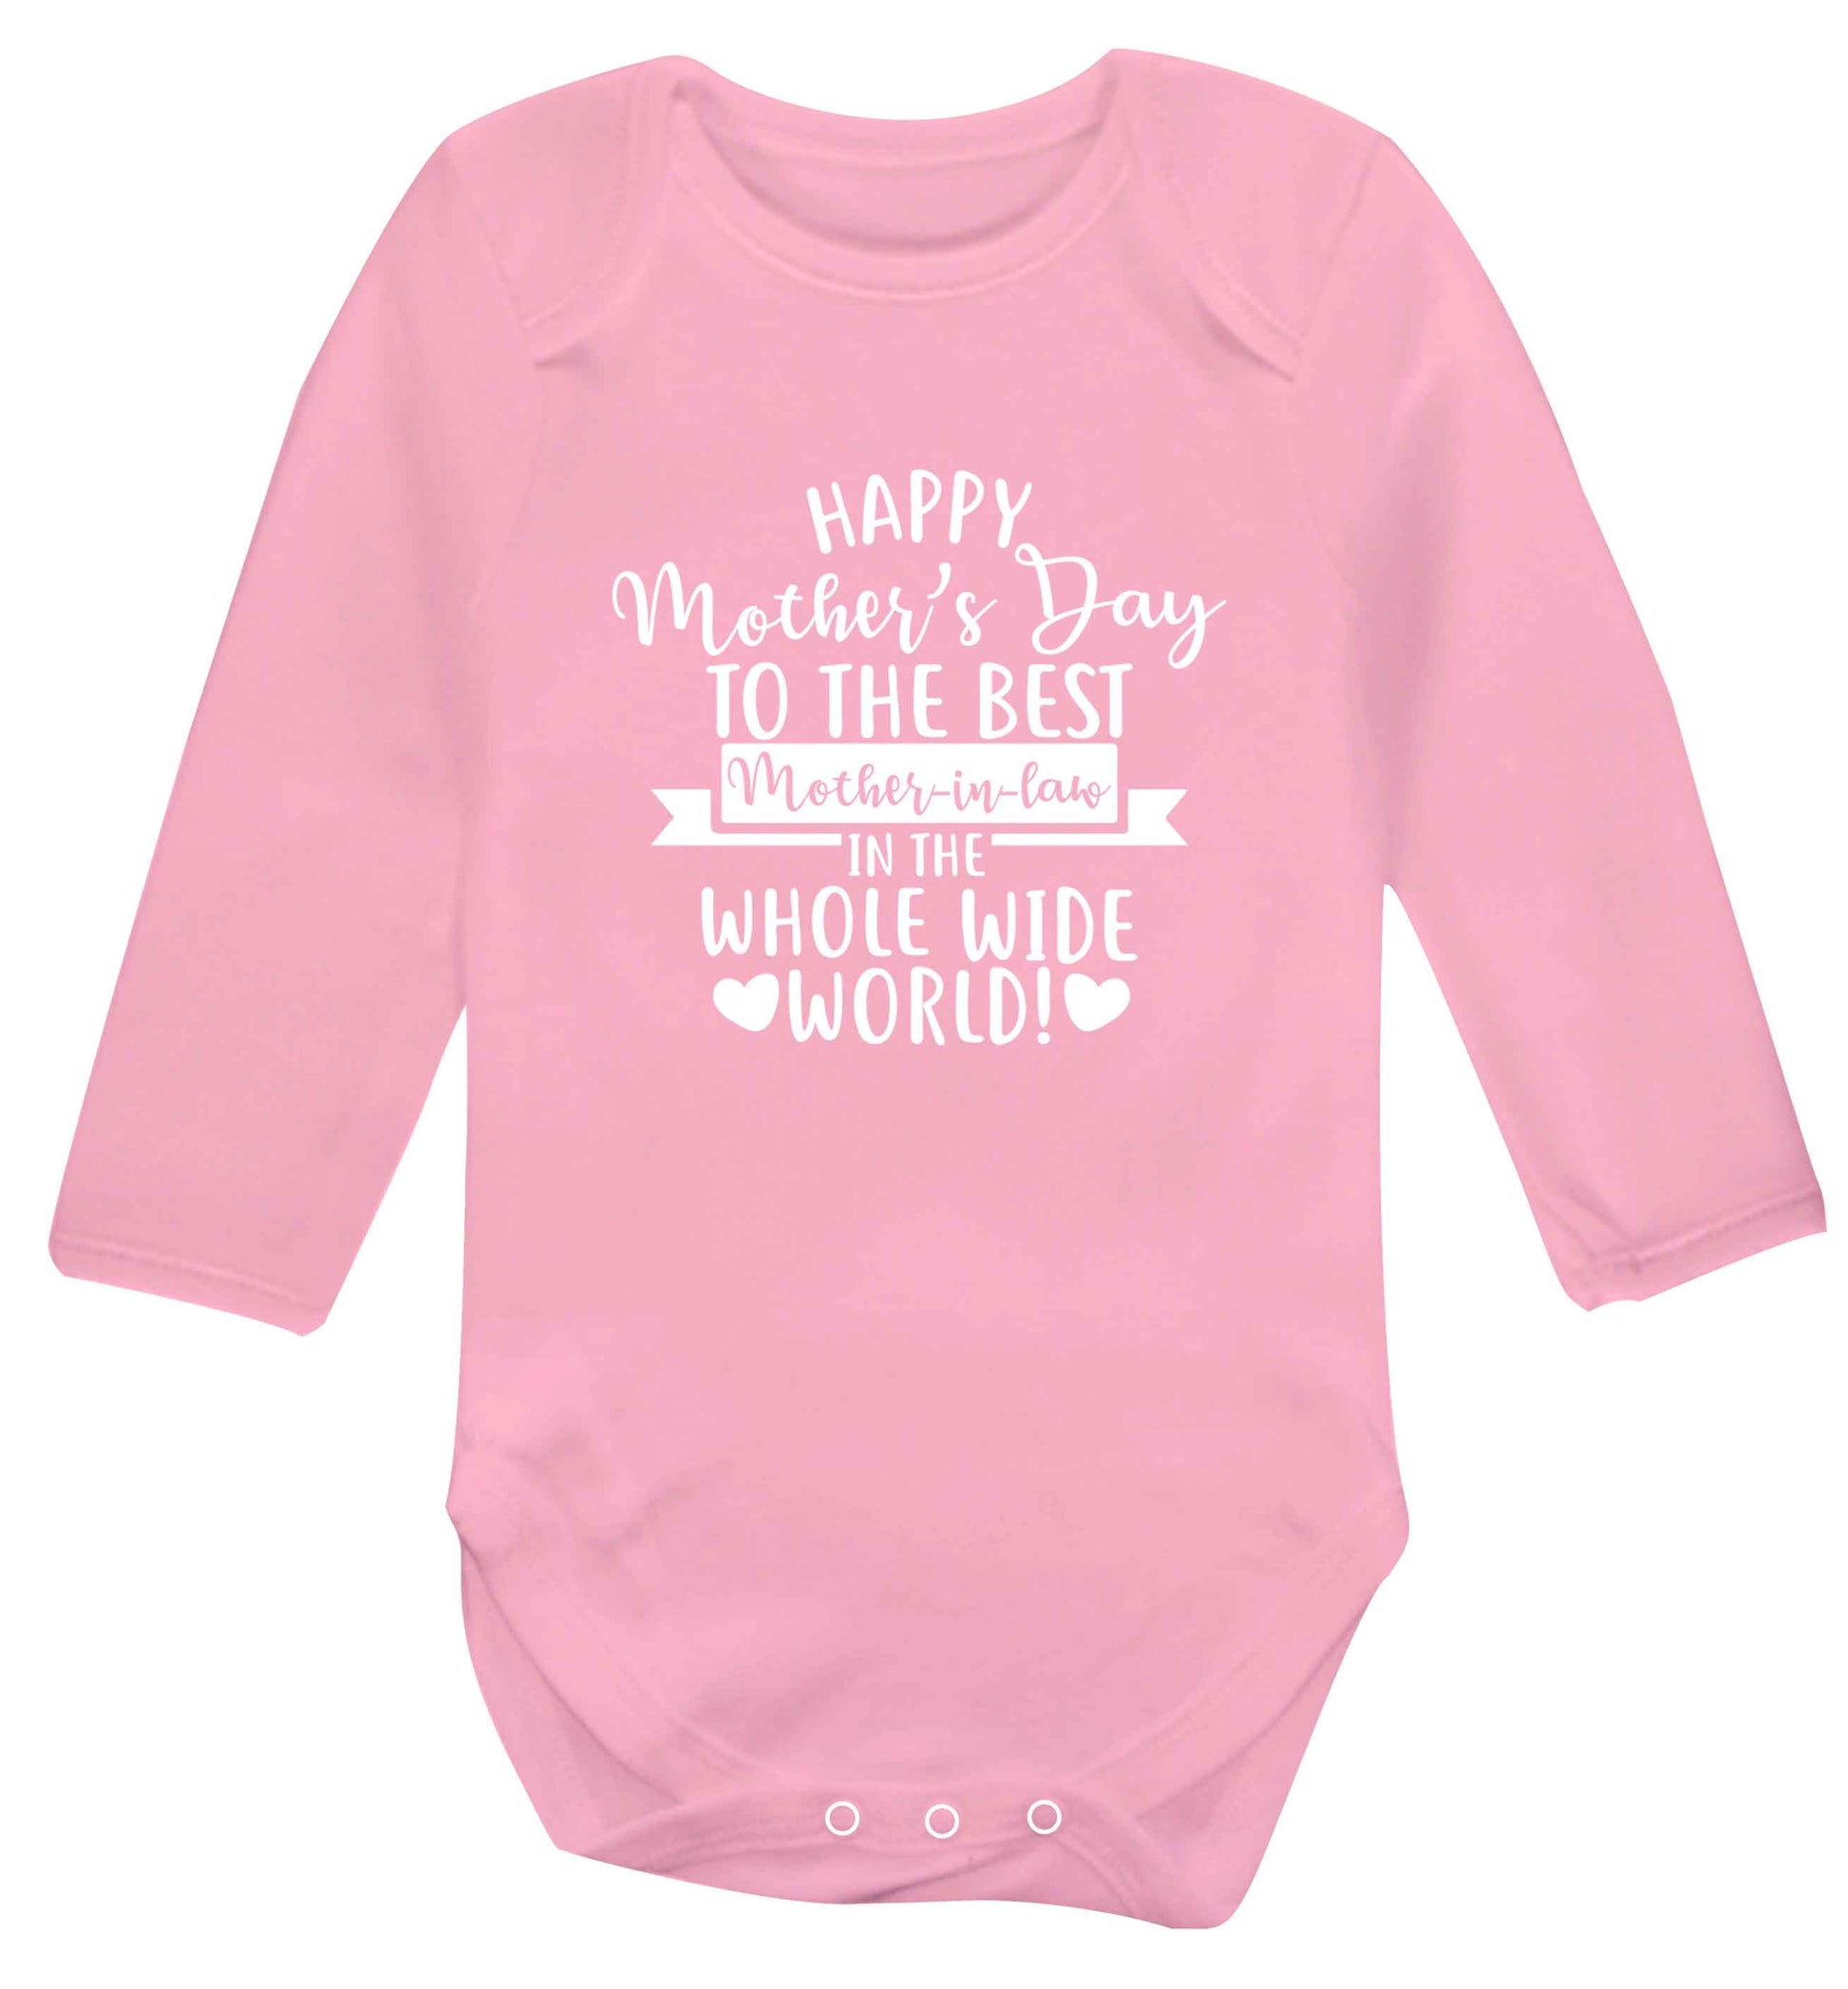 Happy mother's day to the best mother-in law in the world baby vest long sleeved pale pink 6-12 months